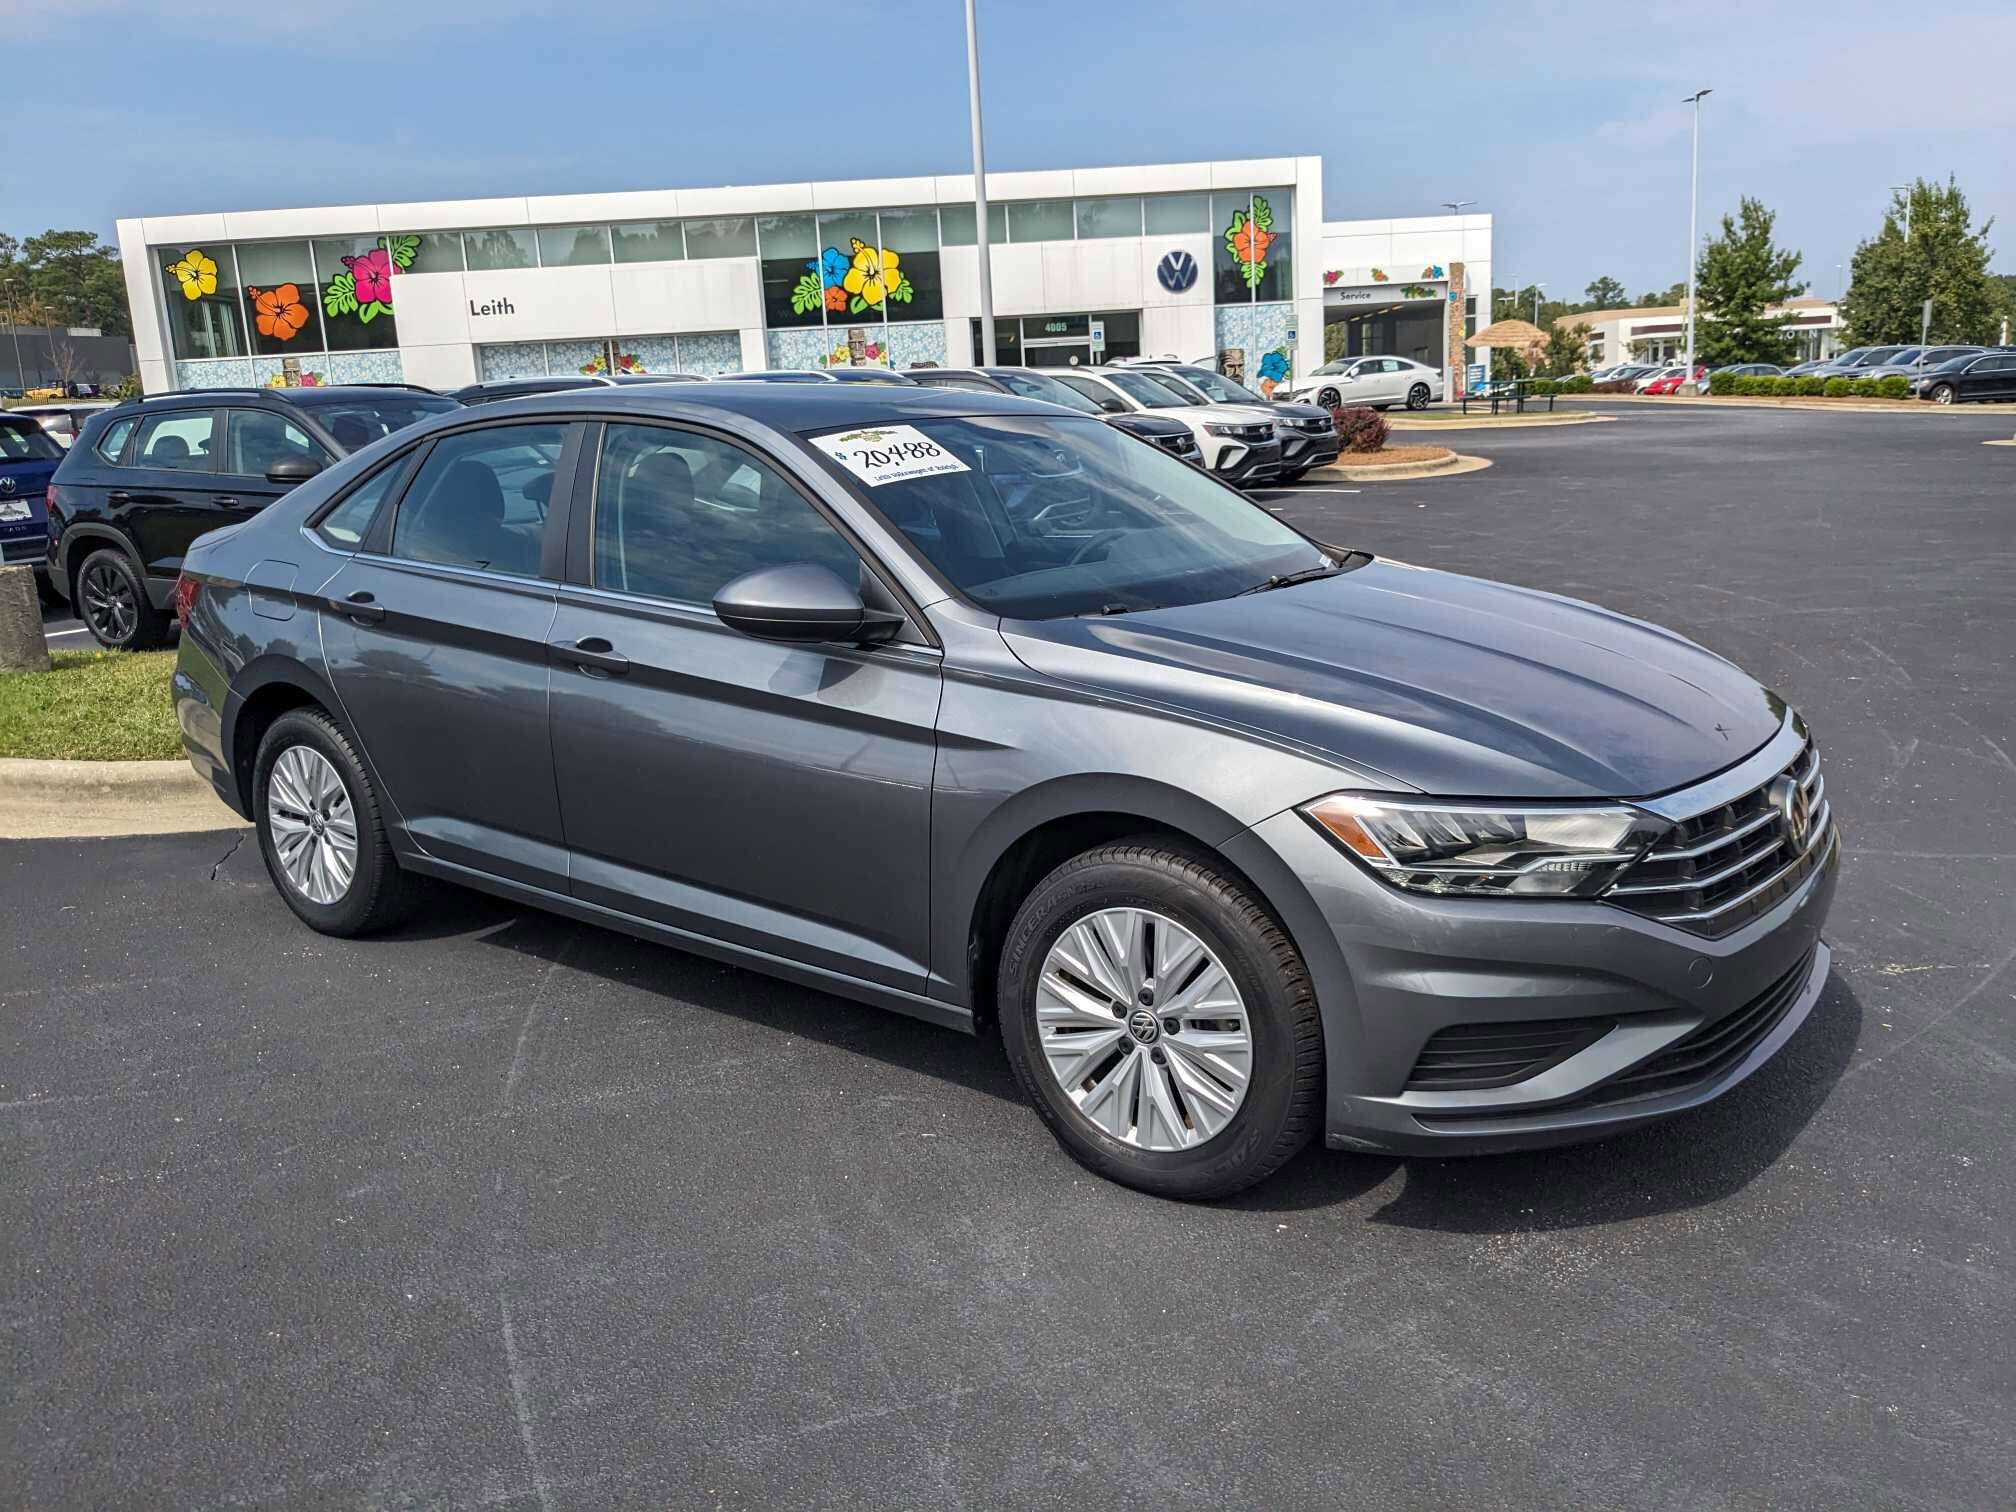 Used 2019 Volkswagen Jetta For Sale in Cary NC near Raleigh, Chapel Hill & Durham 3VWC57BU6KM150747